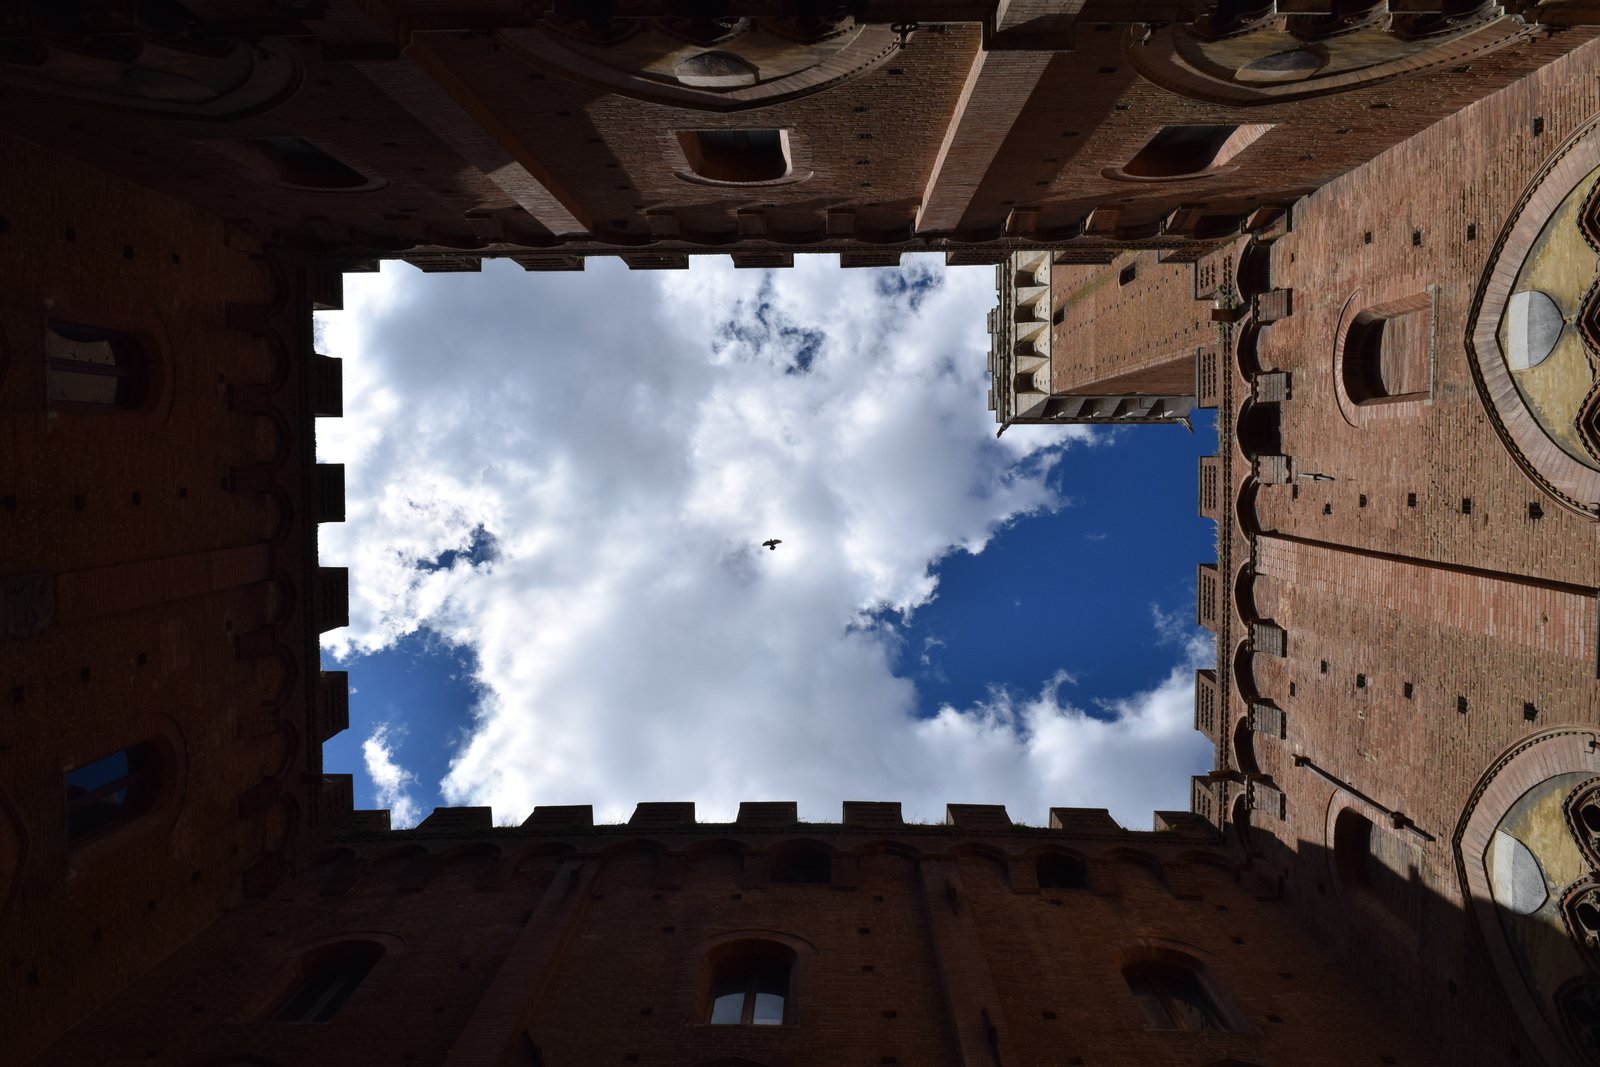 Looking up to the main tower in Siena, Italy. ouritalianjourney.com